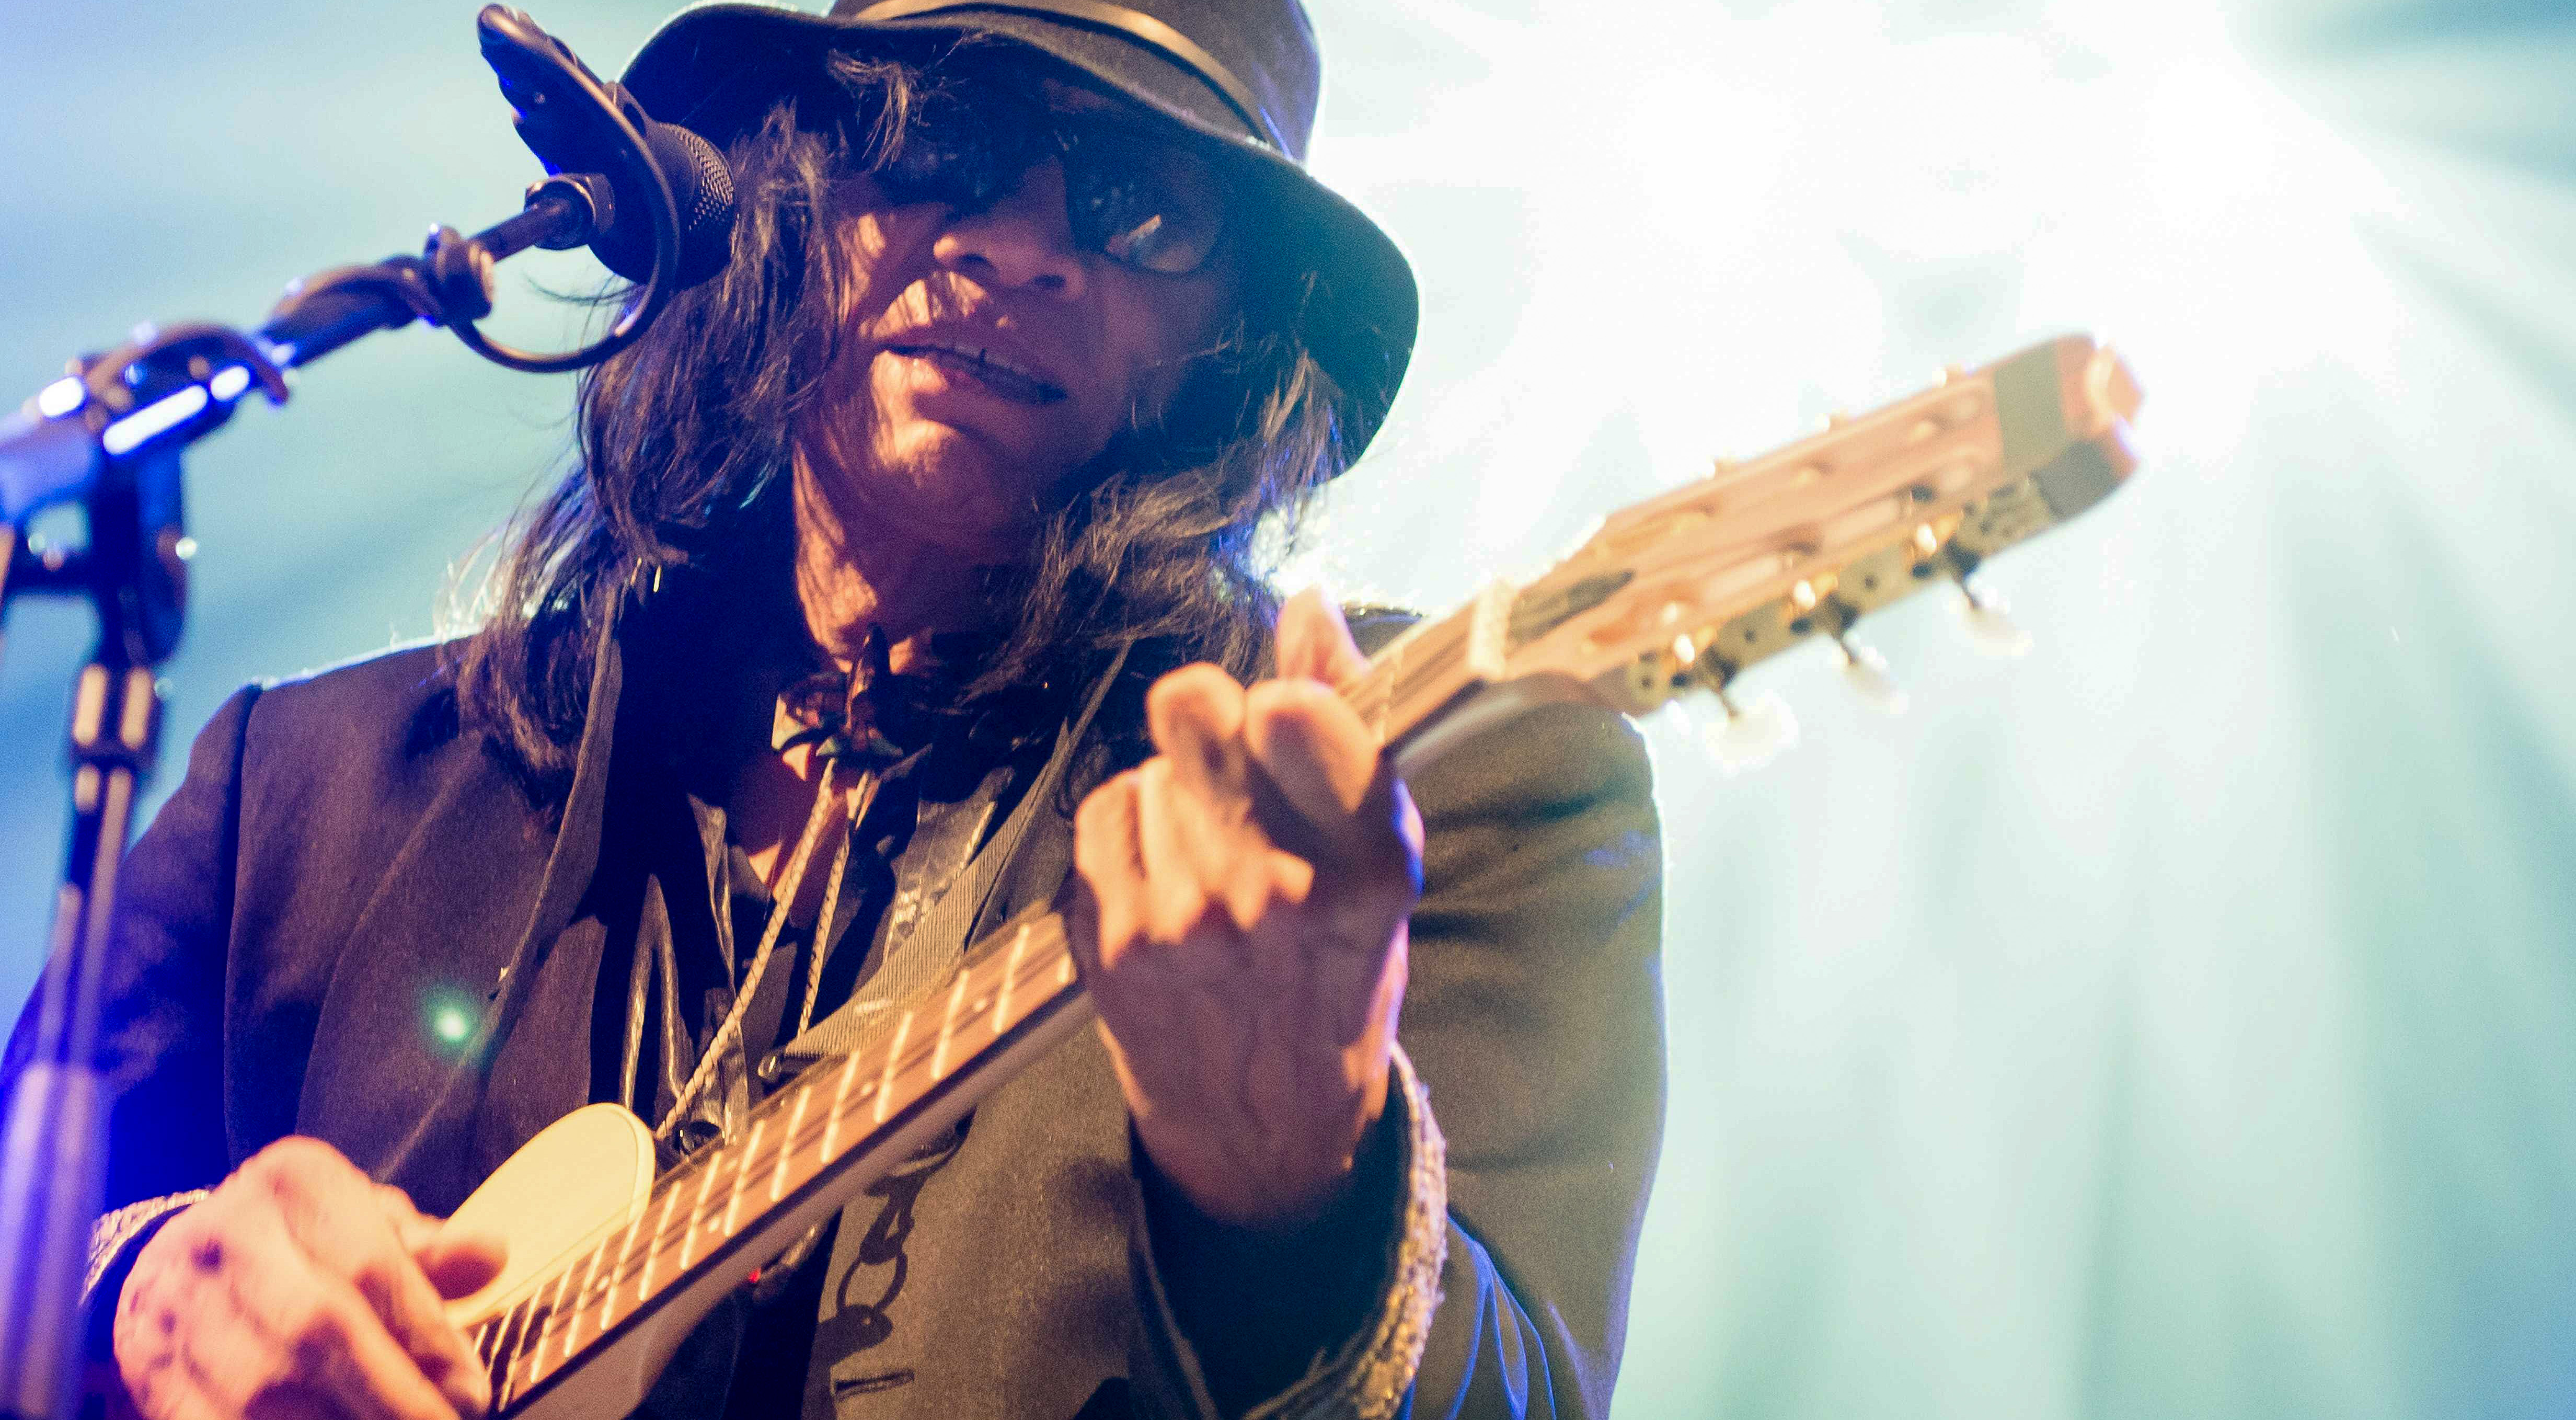 Sixto Rodriguez on stage